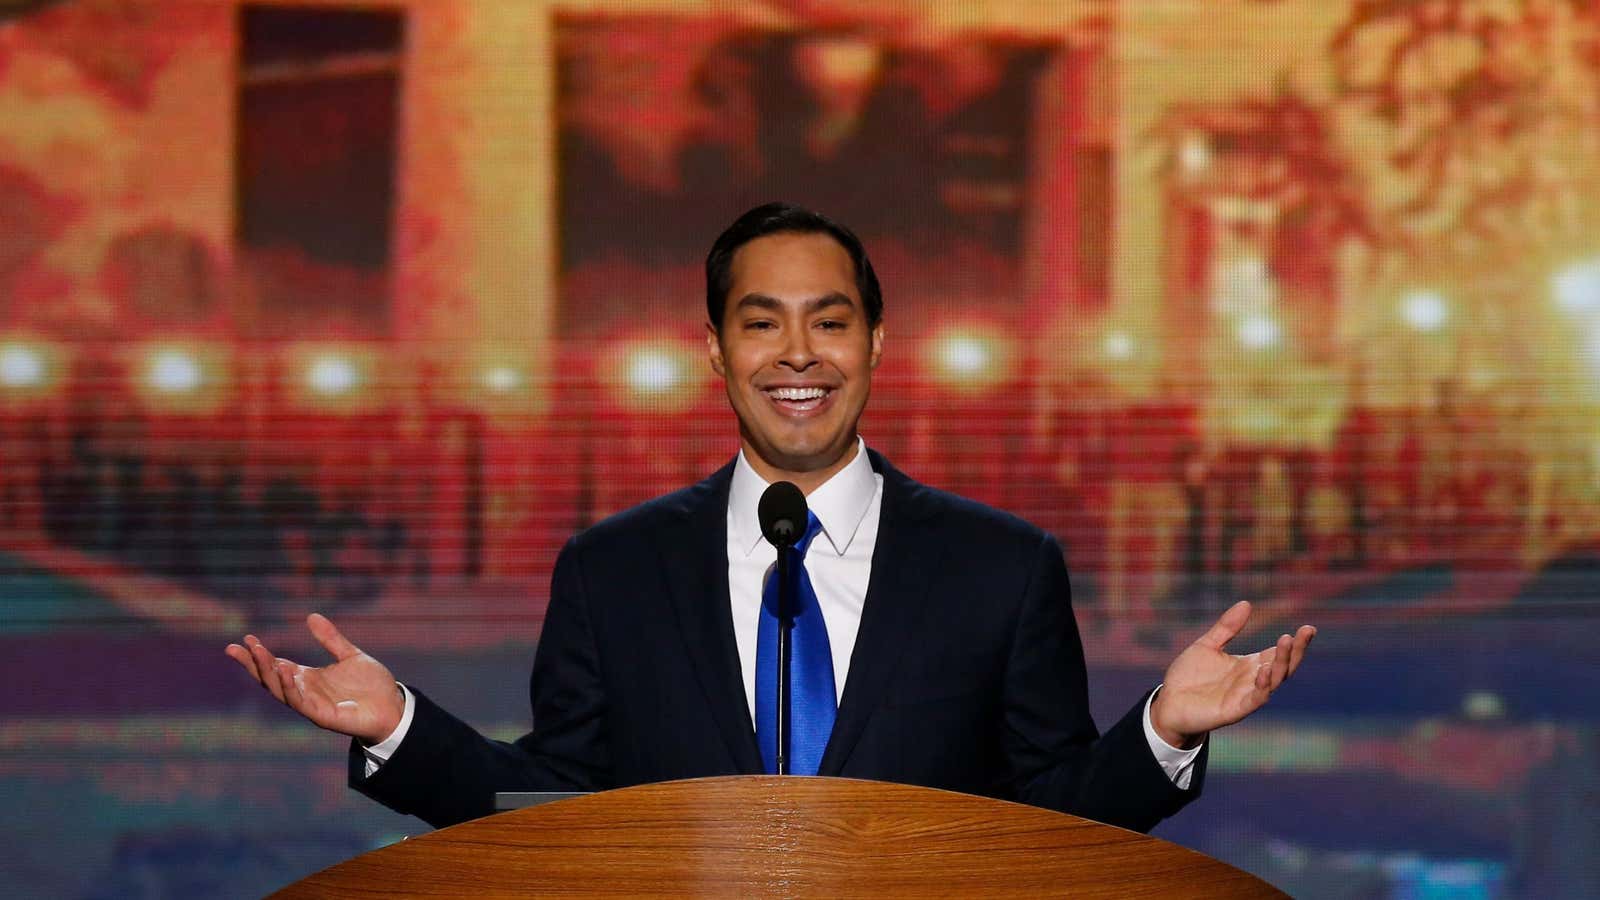 Julian Castro told his story at the 2012 Democratic National Convention.